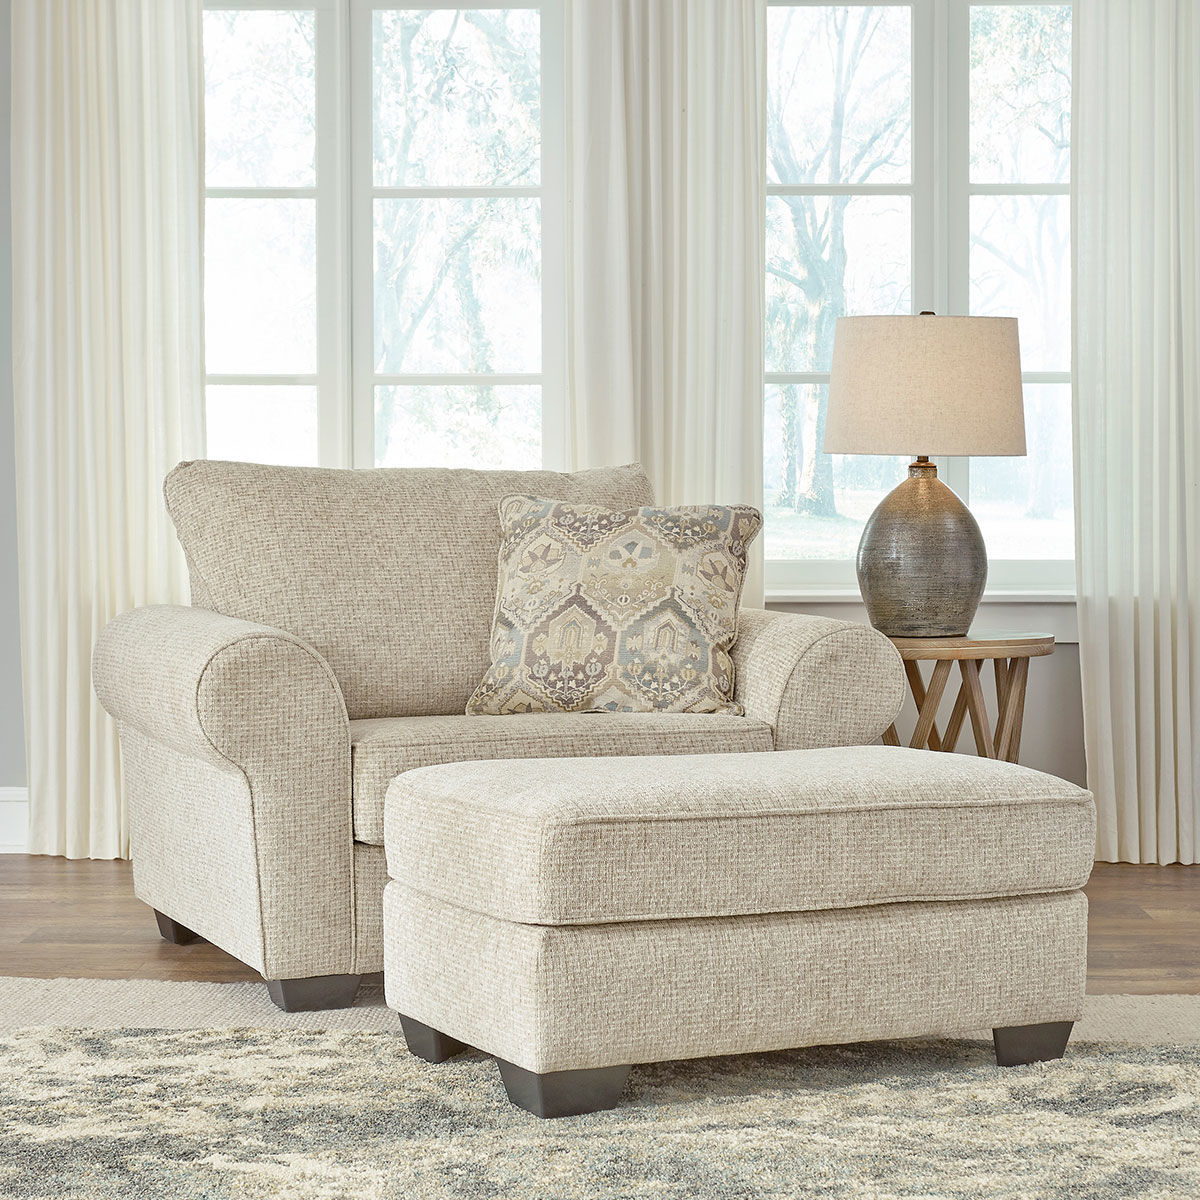 Picture of HANOVER LIVING ROOM COLLECTION